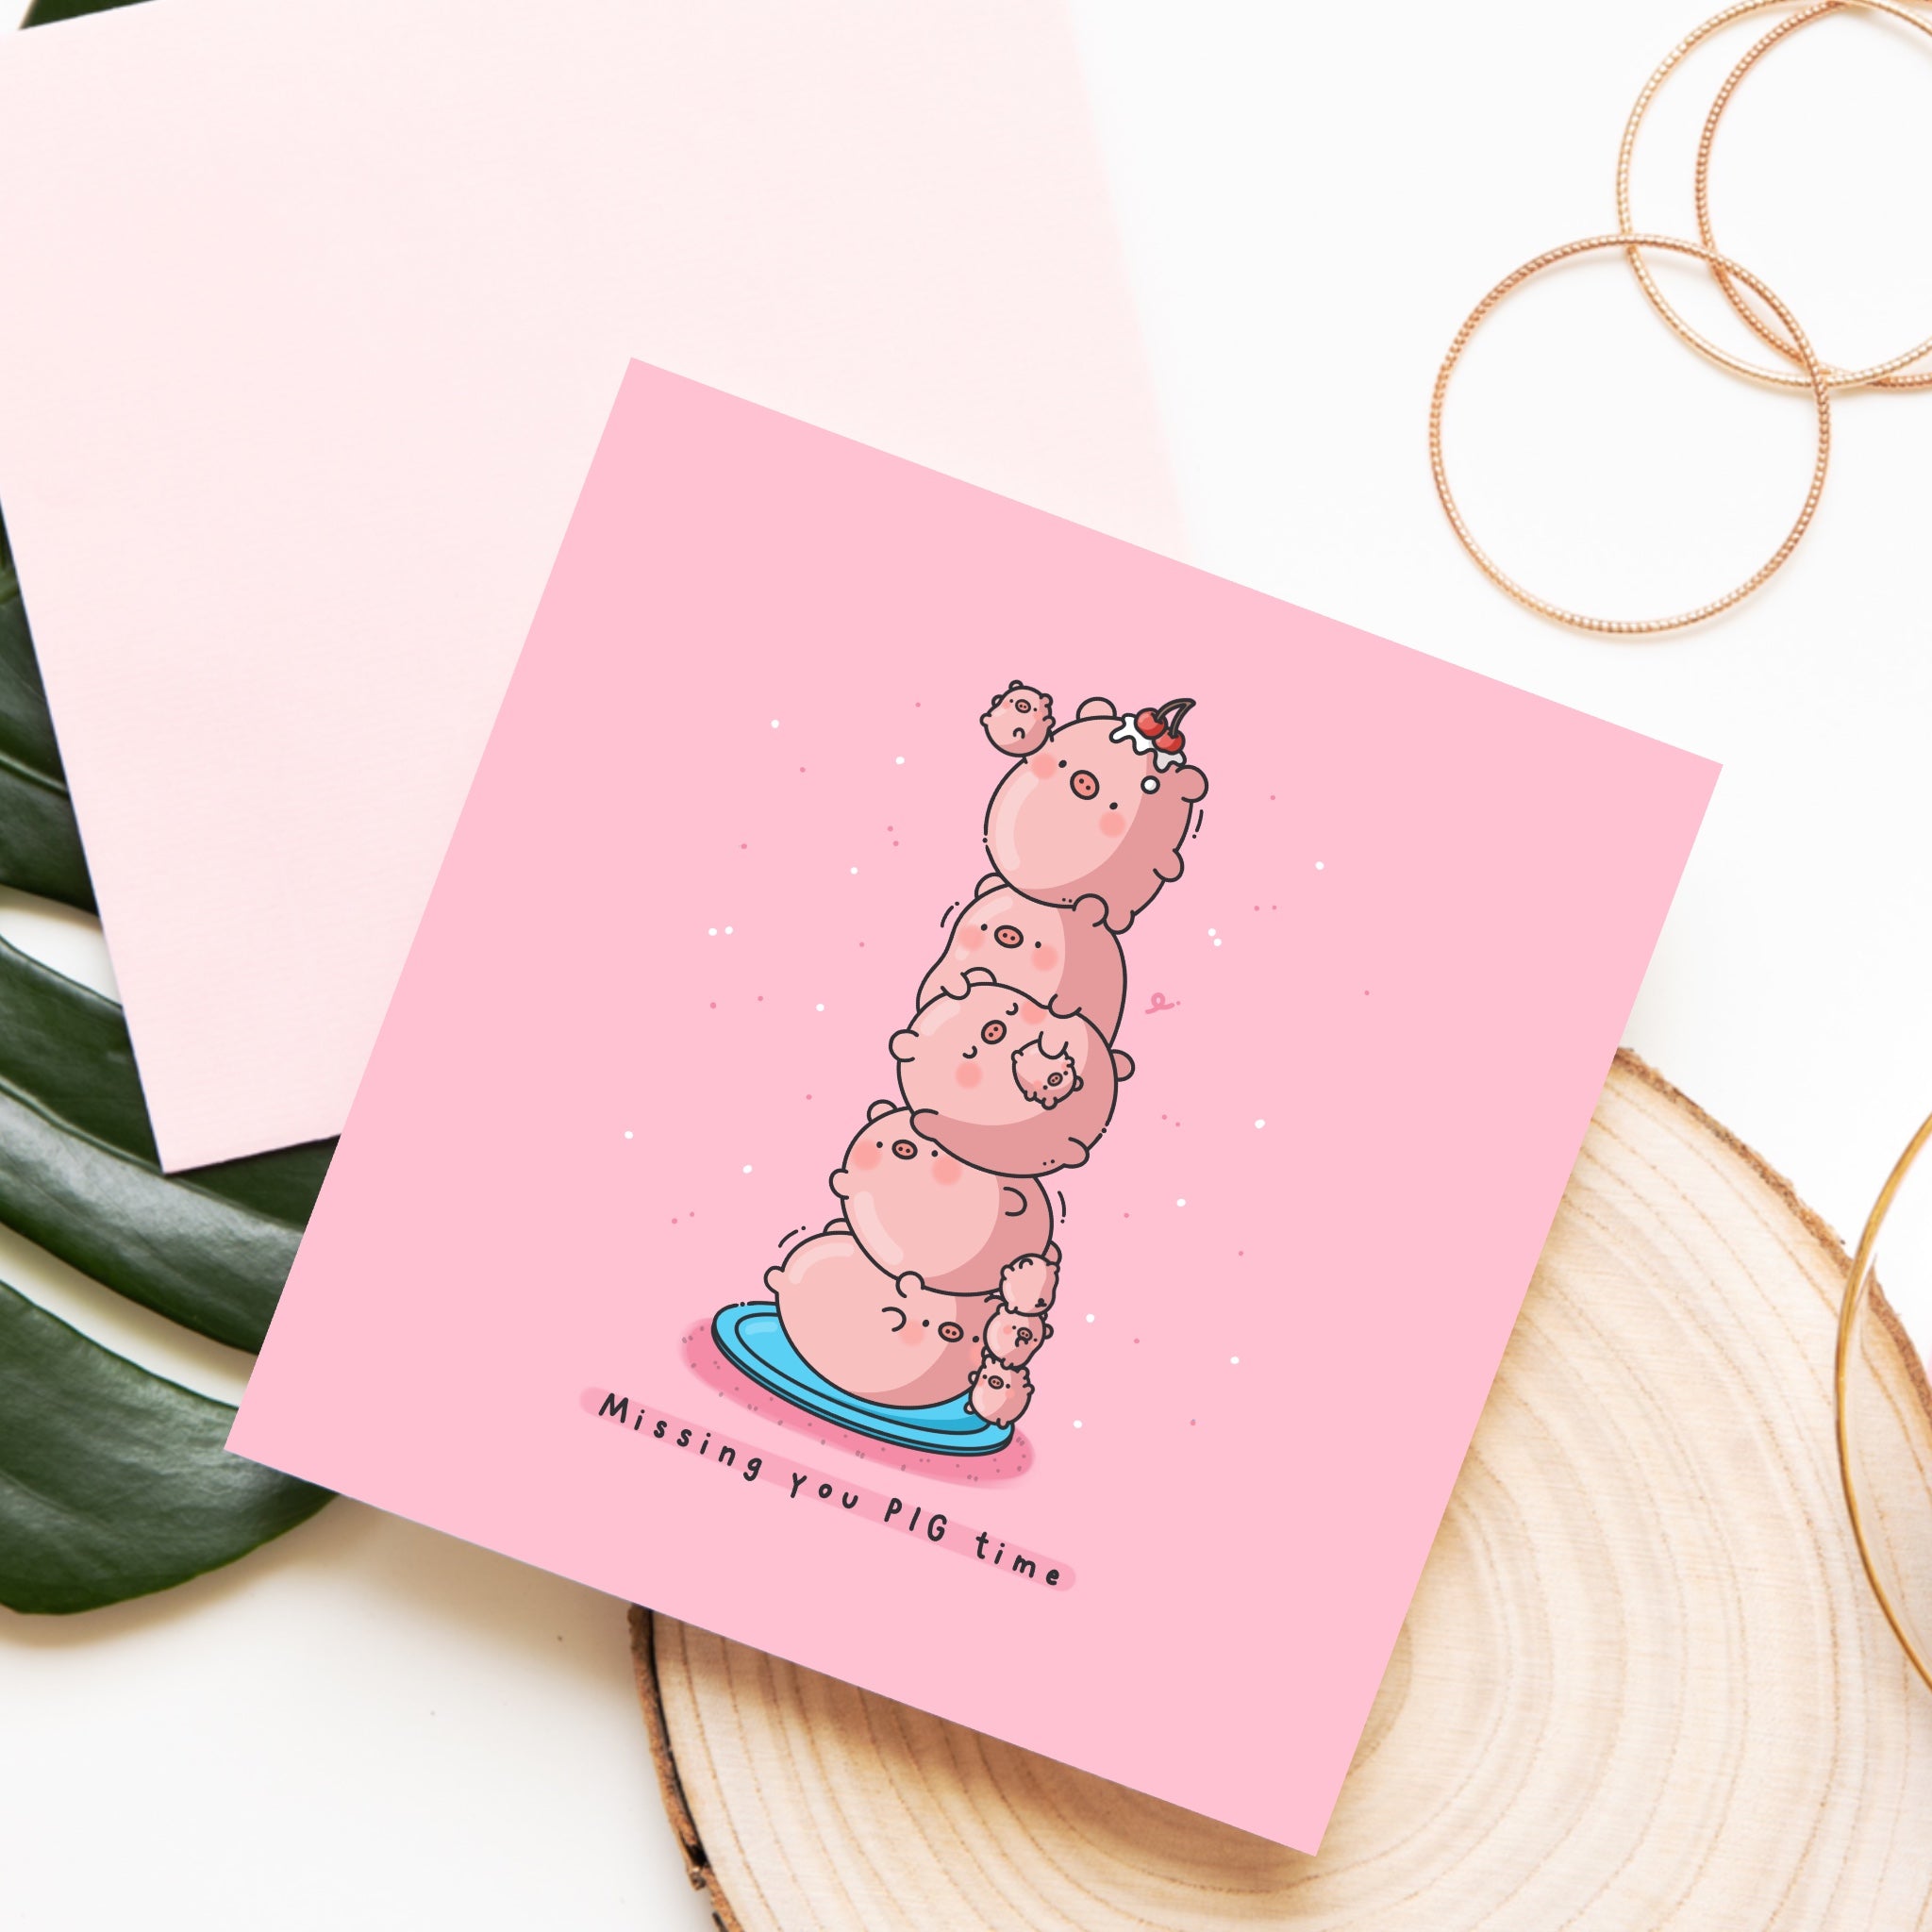 Pig card on wooden piece